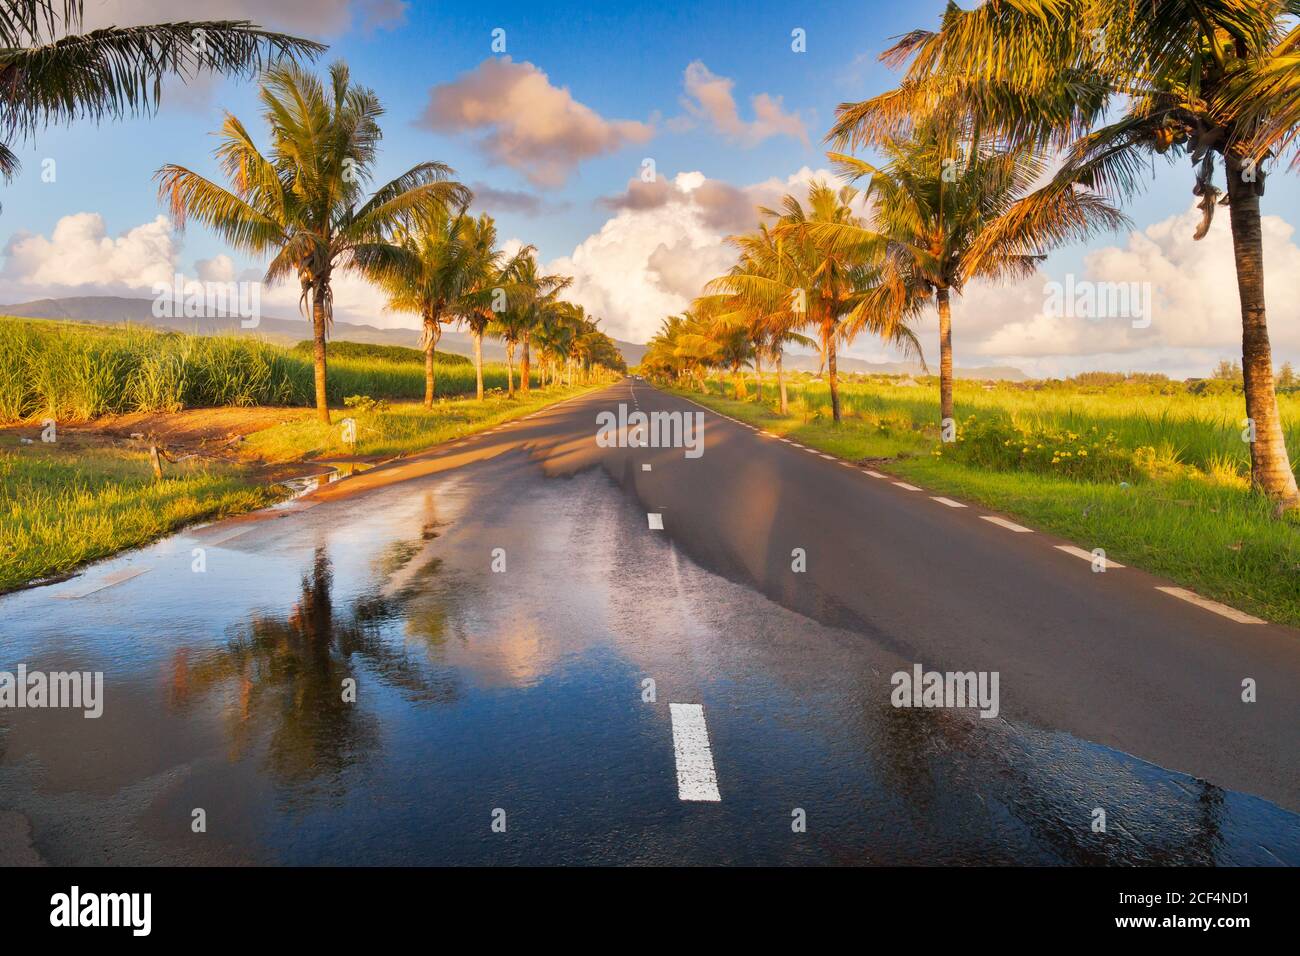 Countryside road lined with palm trees in the south part of Mauritius island on a sunny day Stock Photo